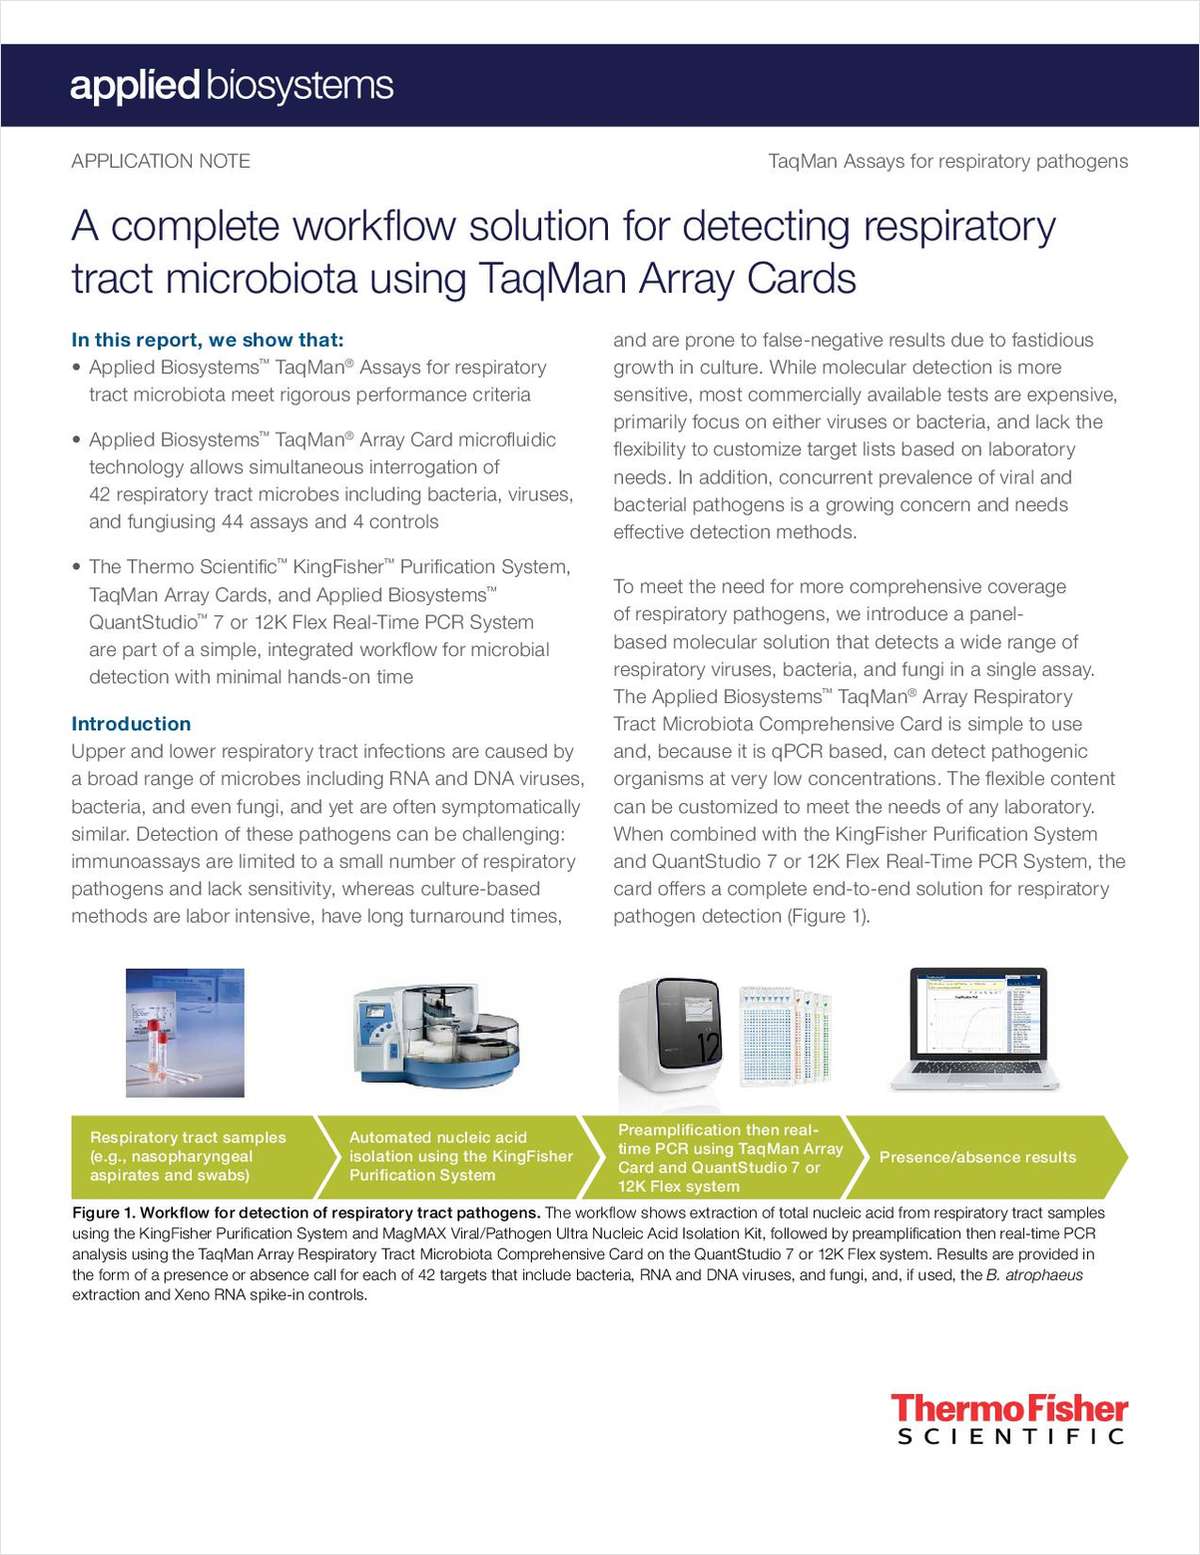 A Complete Workflow Solution for Detecting Respiratory Tract Microbiota Using TaqMan Array Cards